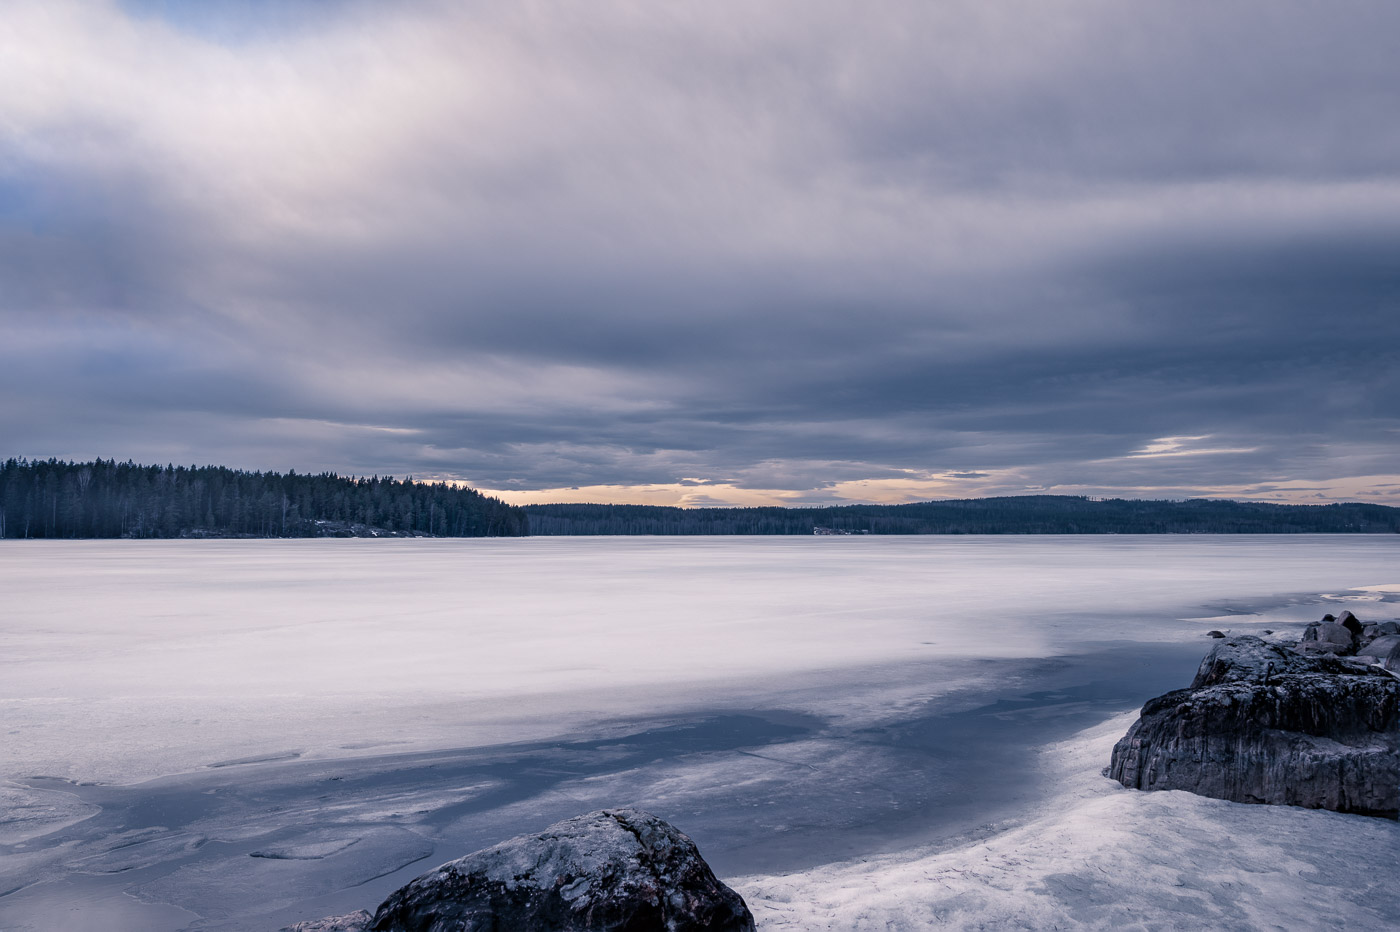 Frozen lake scape on a winter day in Sweden